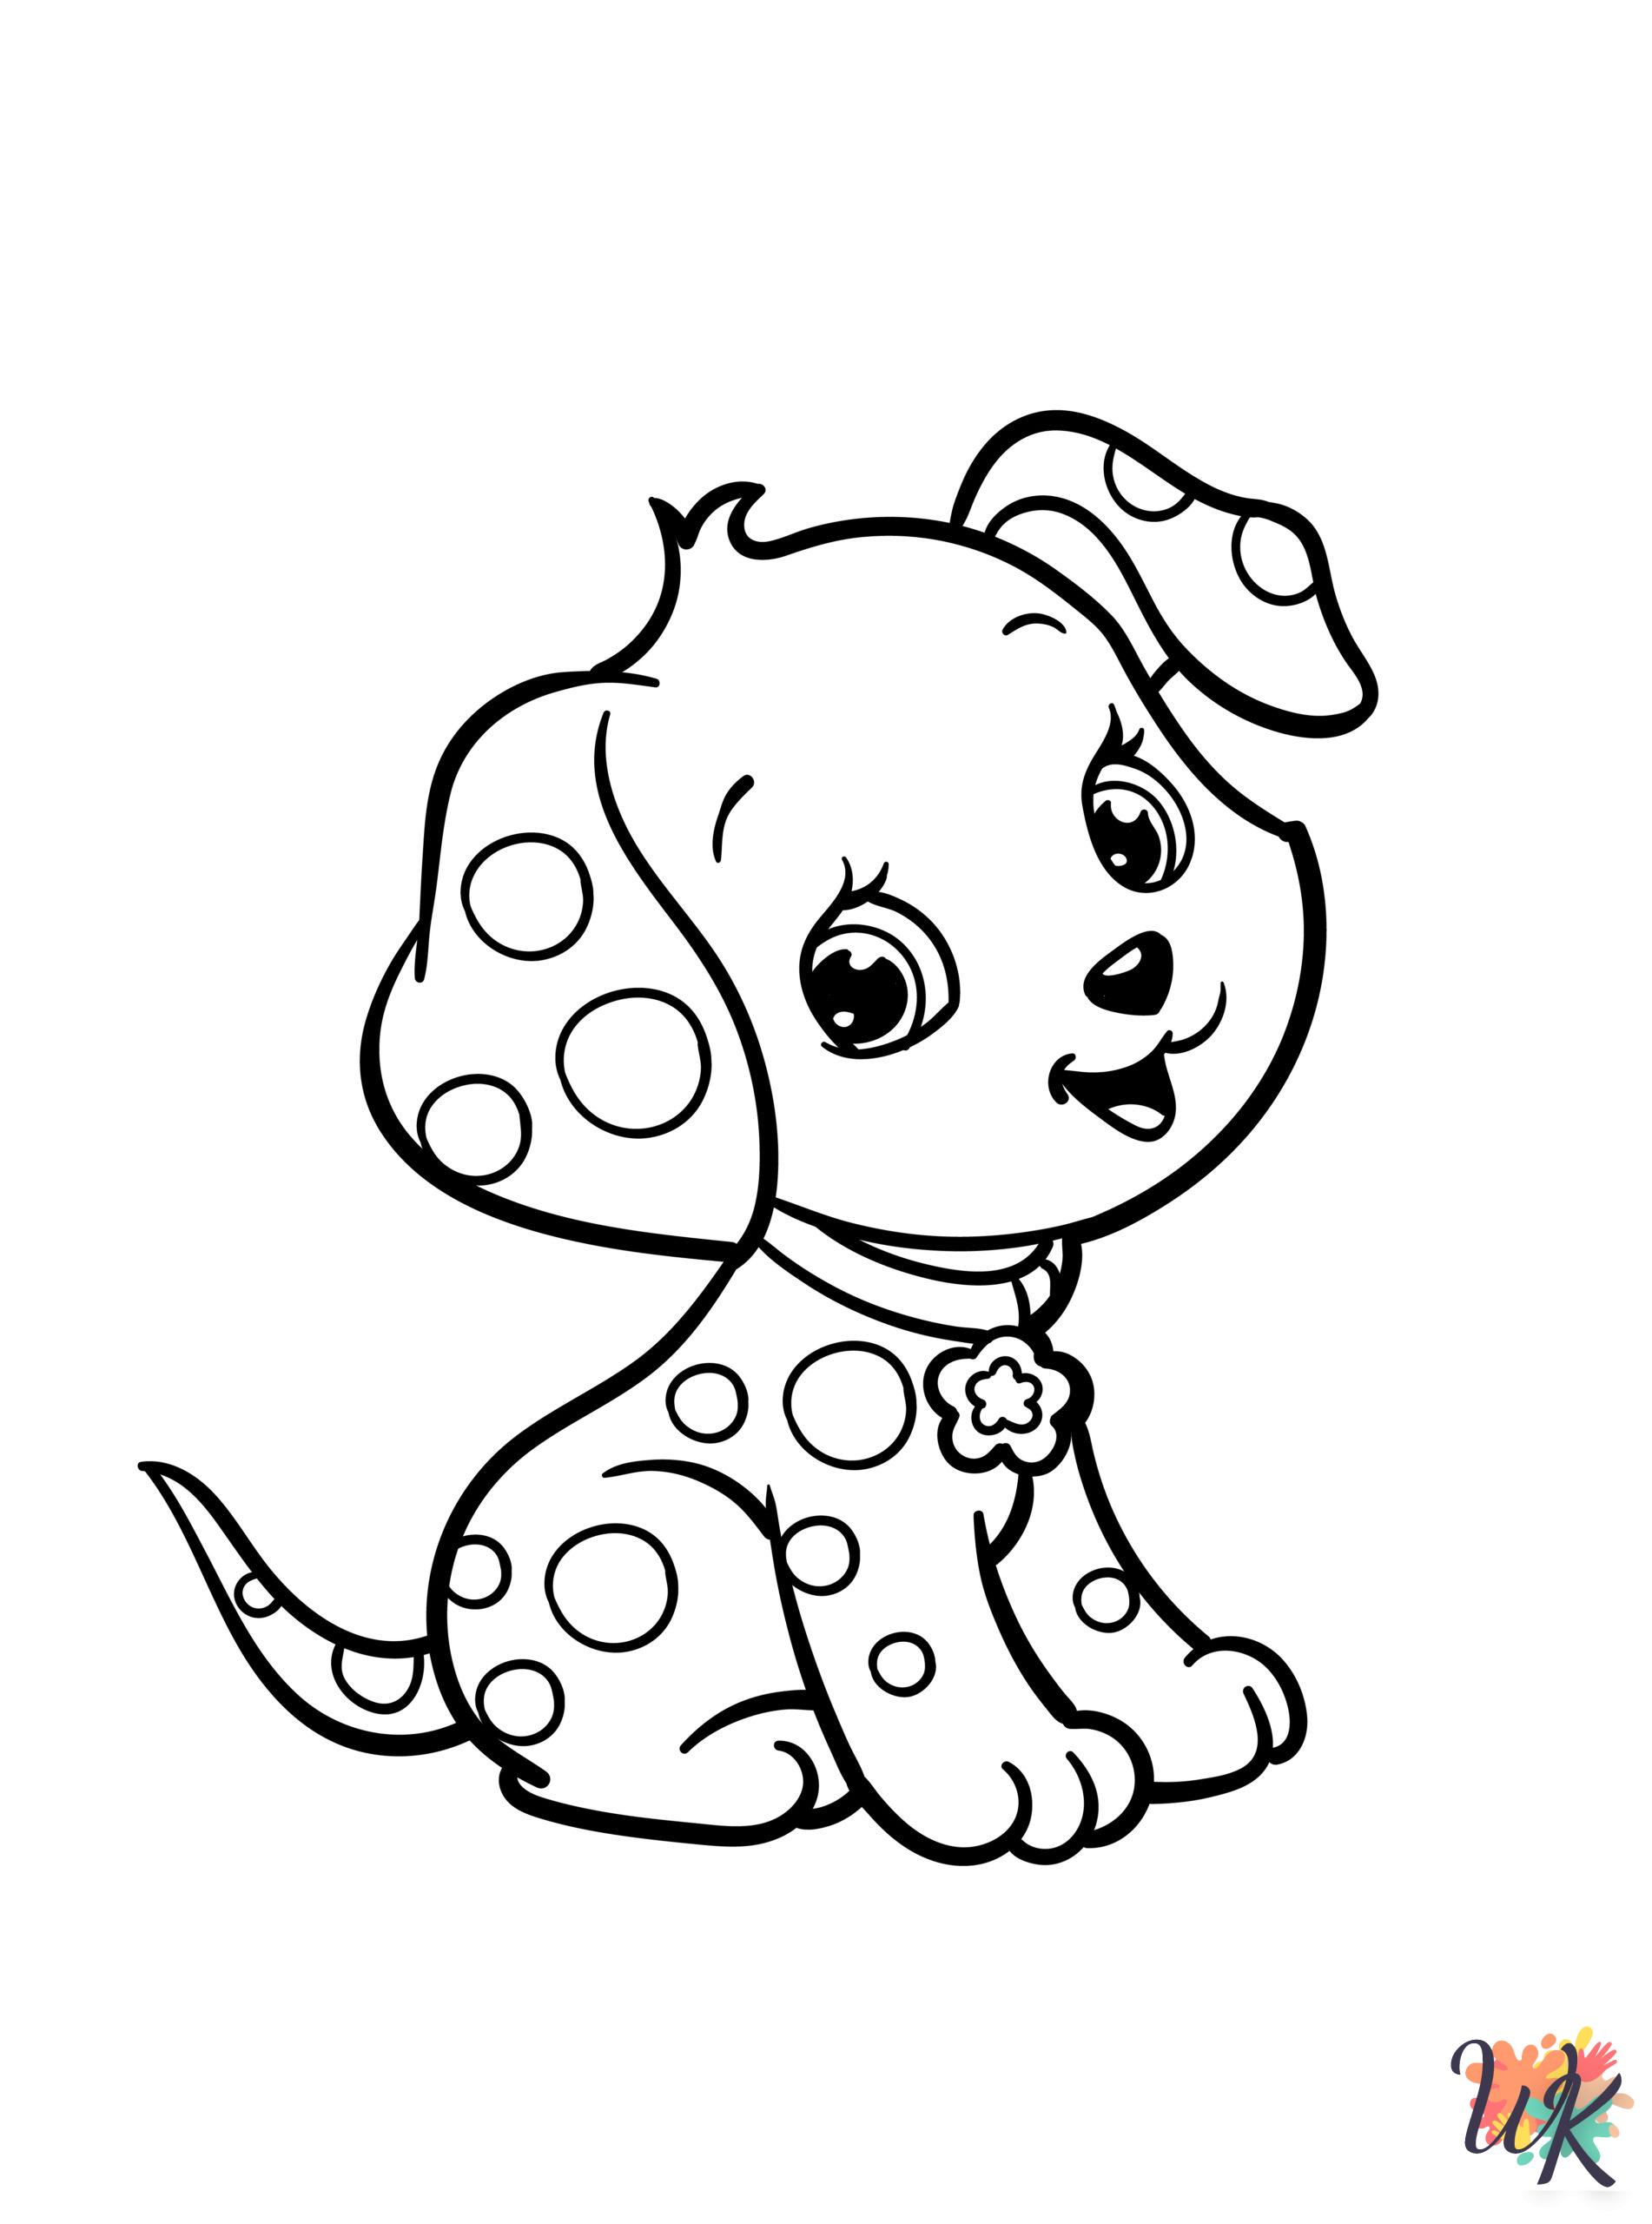 Strawberry Shortcake coloring pages for adults easy